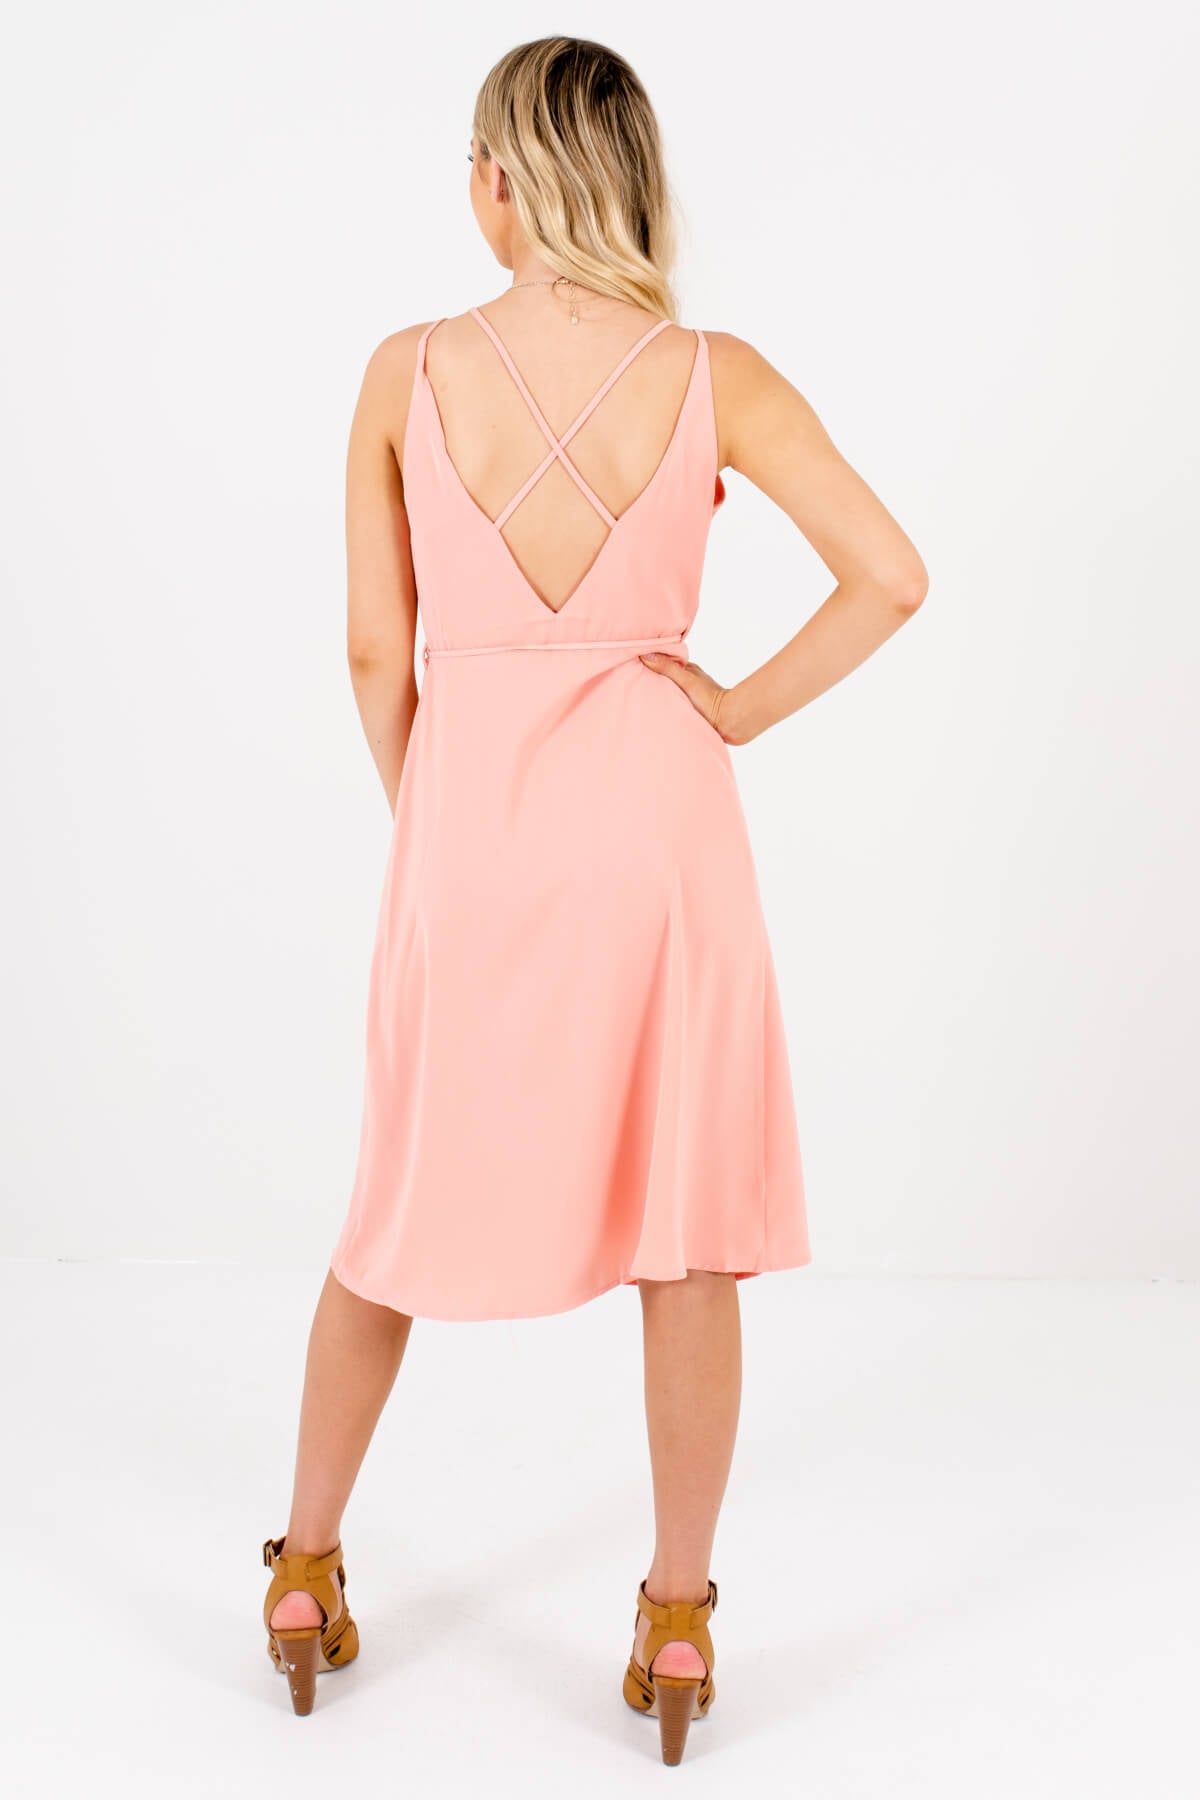 Women's Pink Open Back with Criss-Criss Straps Boutique Dress